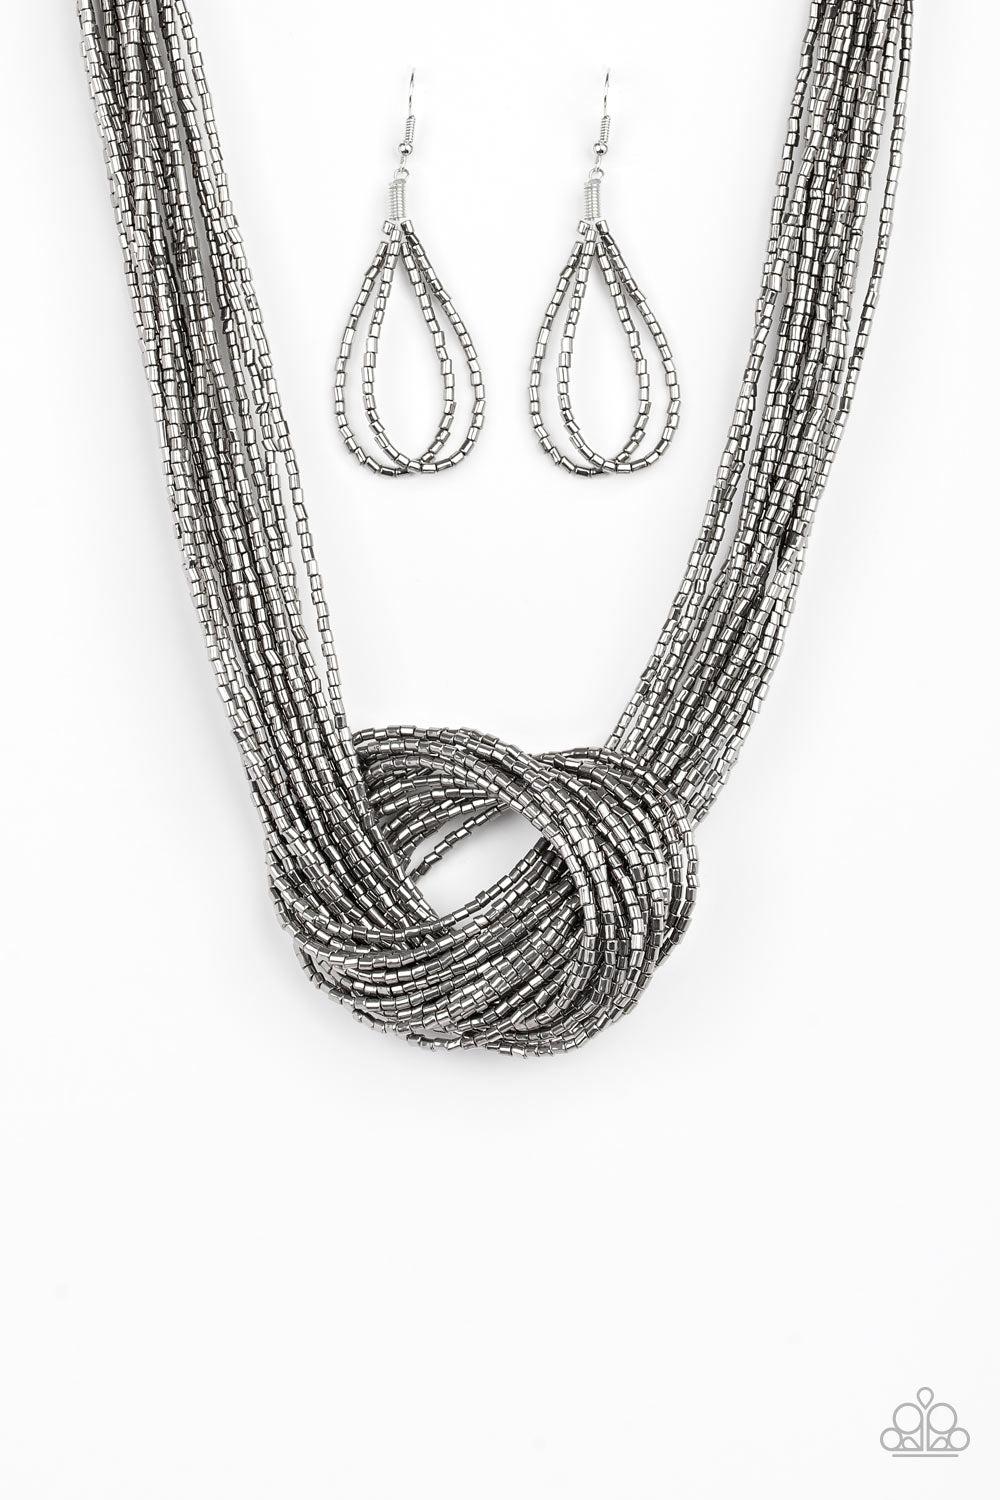 Knotted Knockout Gunmetal Black Seed Bead Necklace - Paparazzi Accessories-CarasShop.com - $5 Jewelry by Cara Jewels